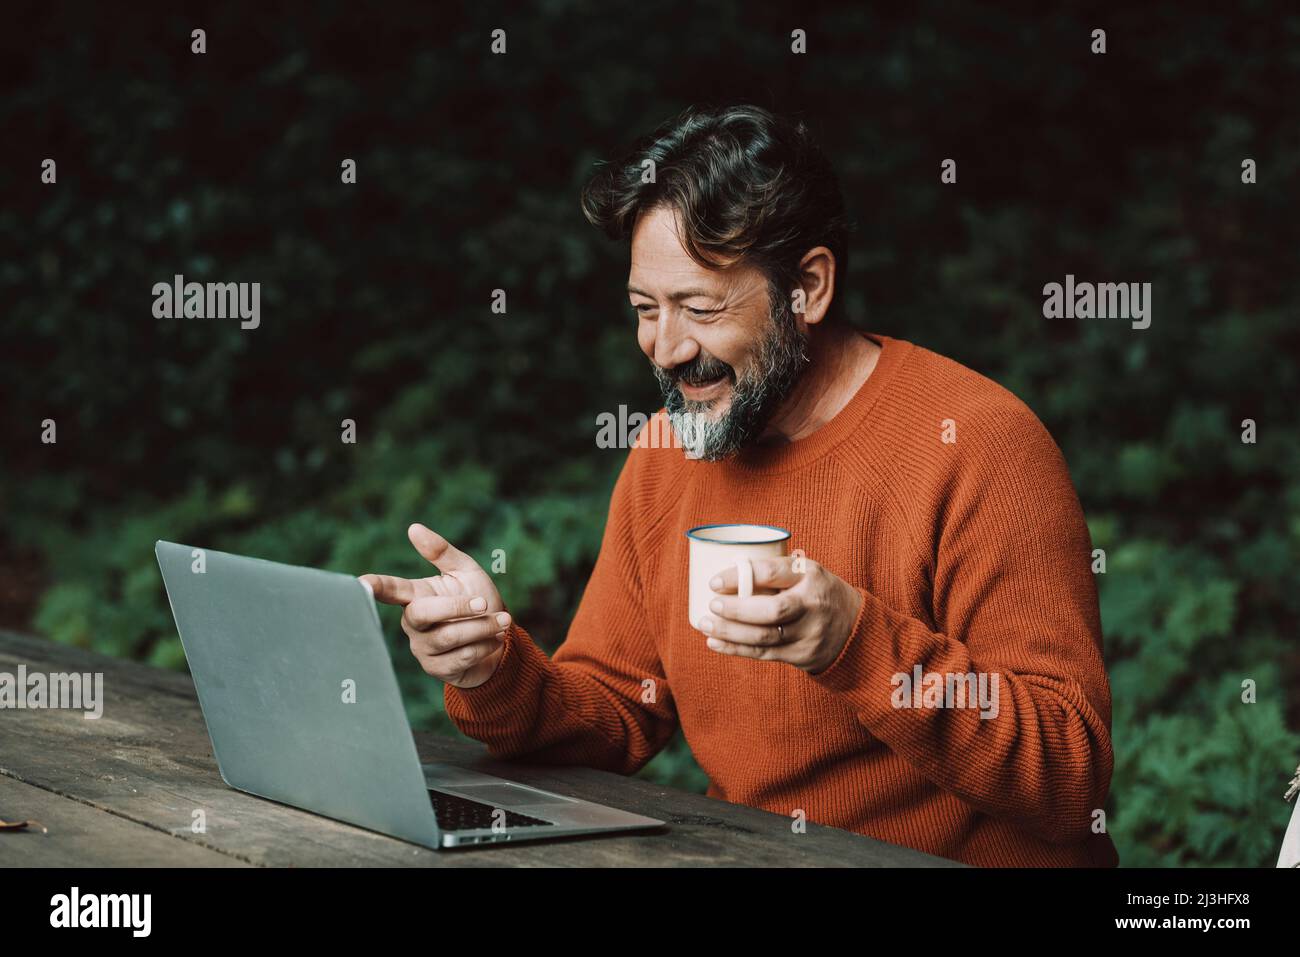 Adult hipster bearded man enjoying video call conference outdoors in the nature using laptop computer. Concept of modern people and digital nomad smart working job activity outdoors Stock Photo